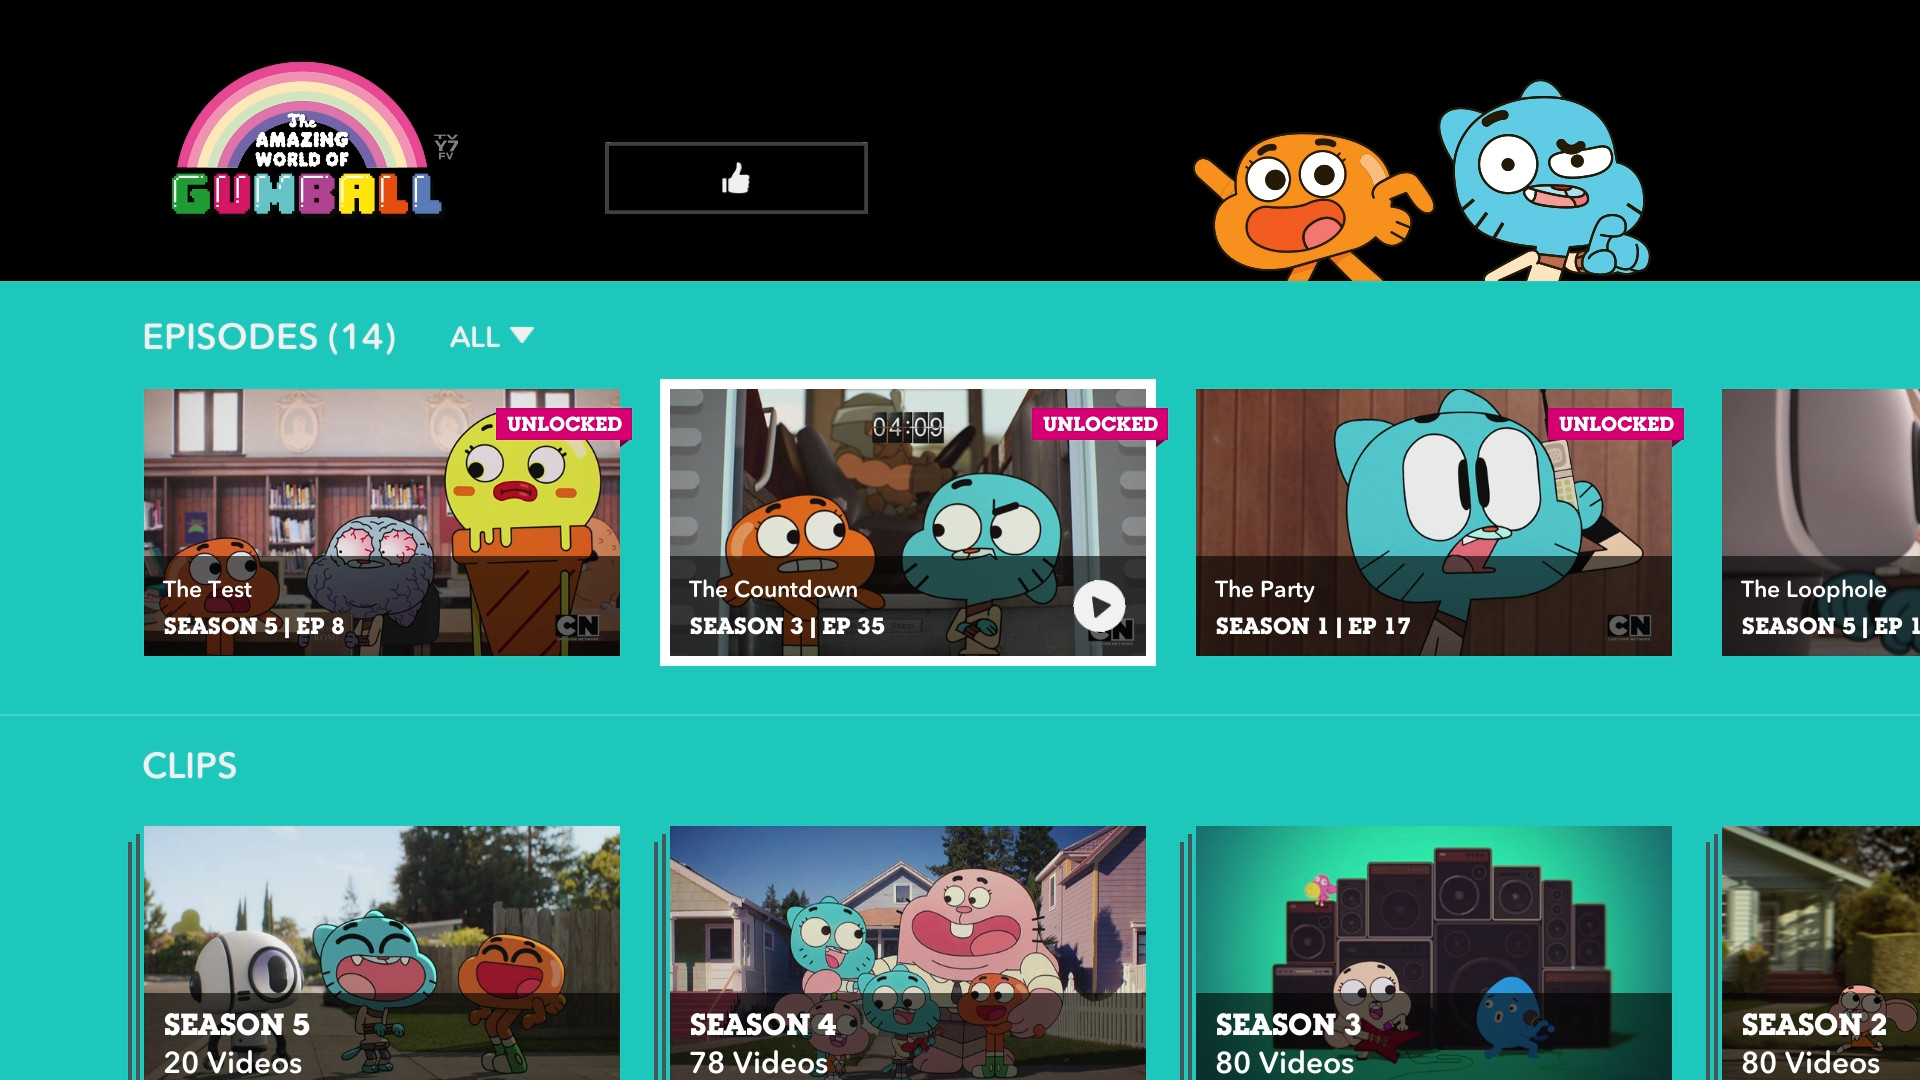 1920x1080 Amazon.com: Cartoon Network App – Watch Videos, Clips and Full Episodes of  Your Favorite Shows: Appstore for Android